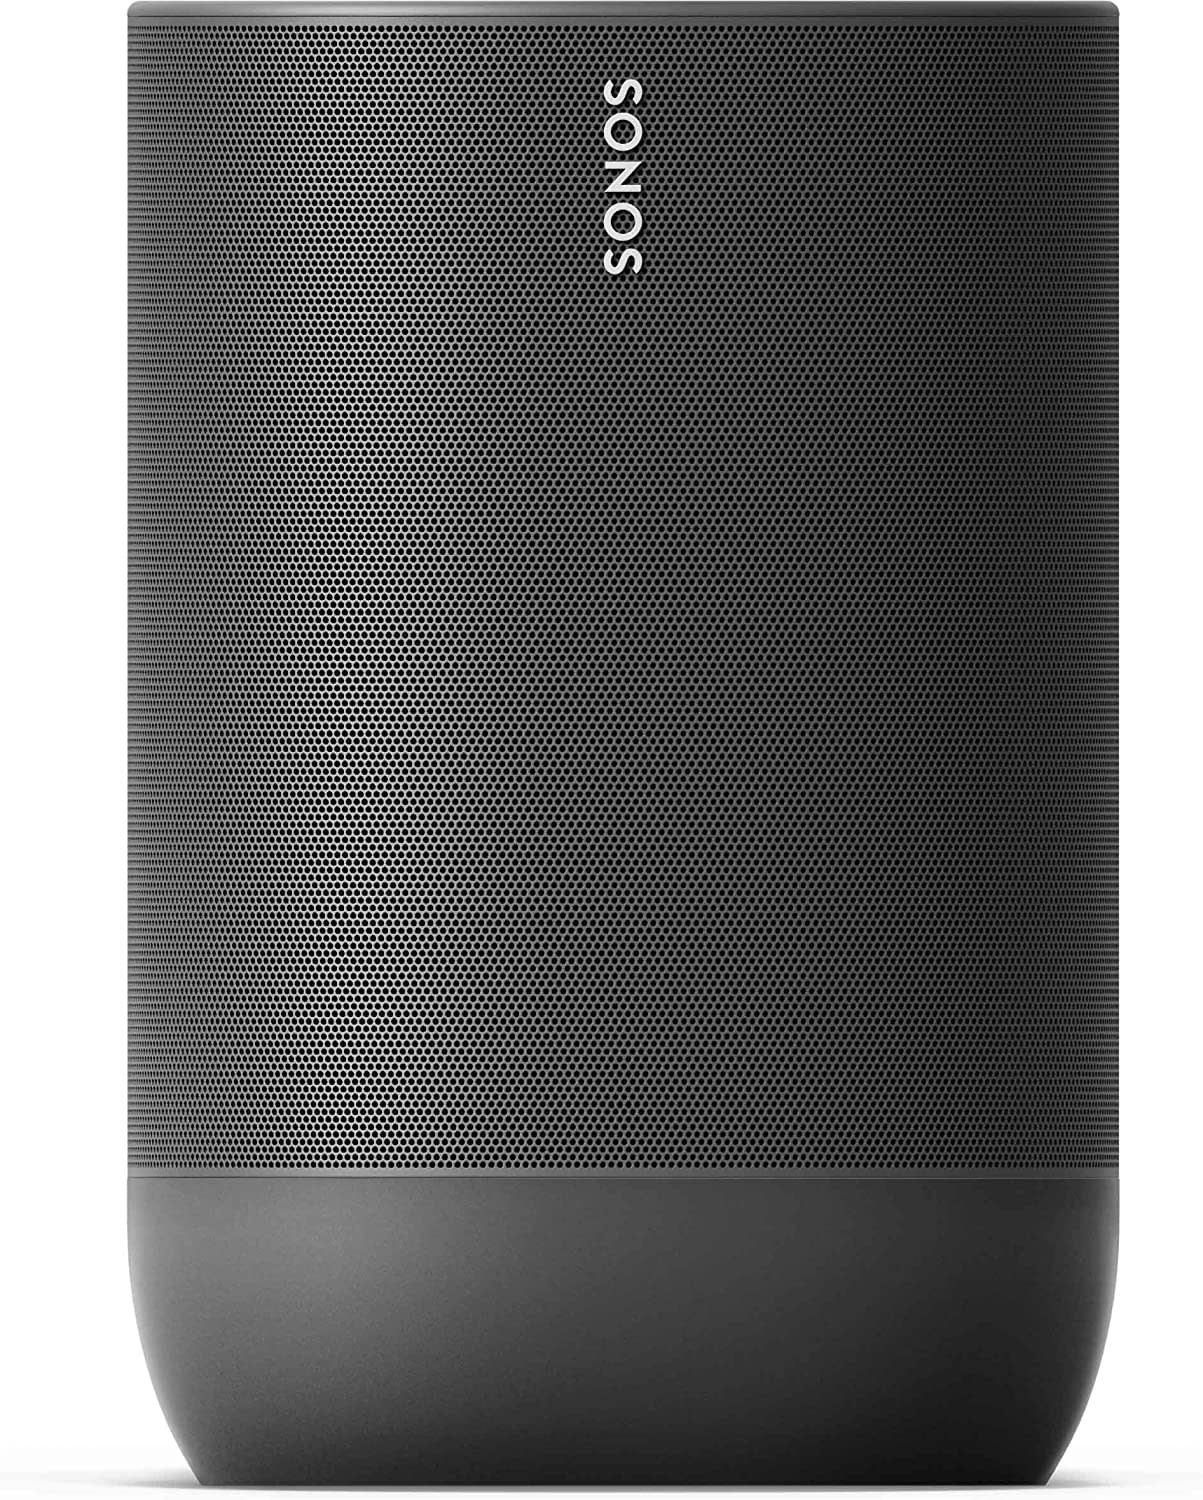 Sonos Battery Powered Speaker good gifts for dad